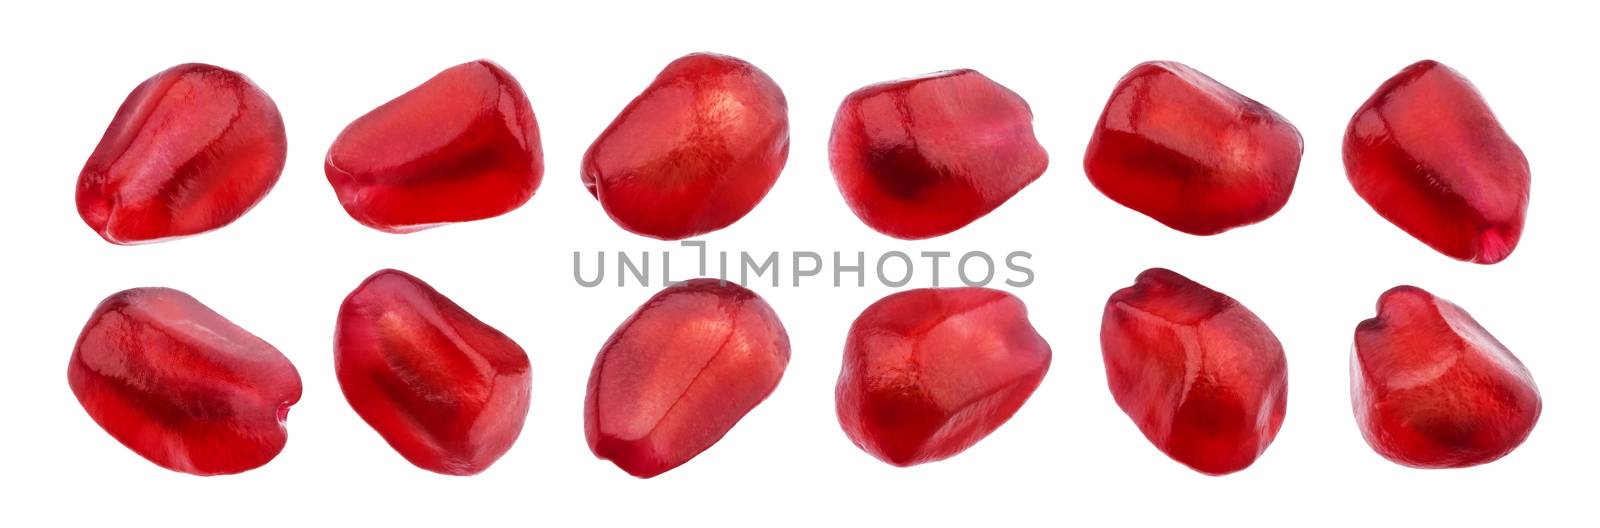 Pomegranate seeds isolated on white background with clipping path, close-up